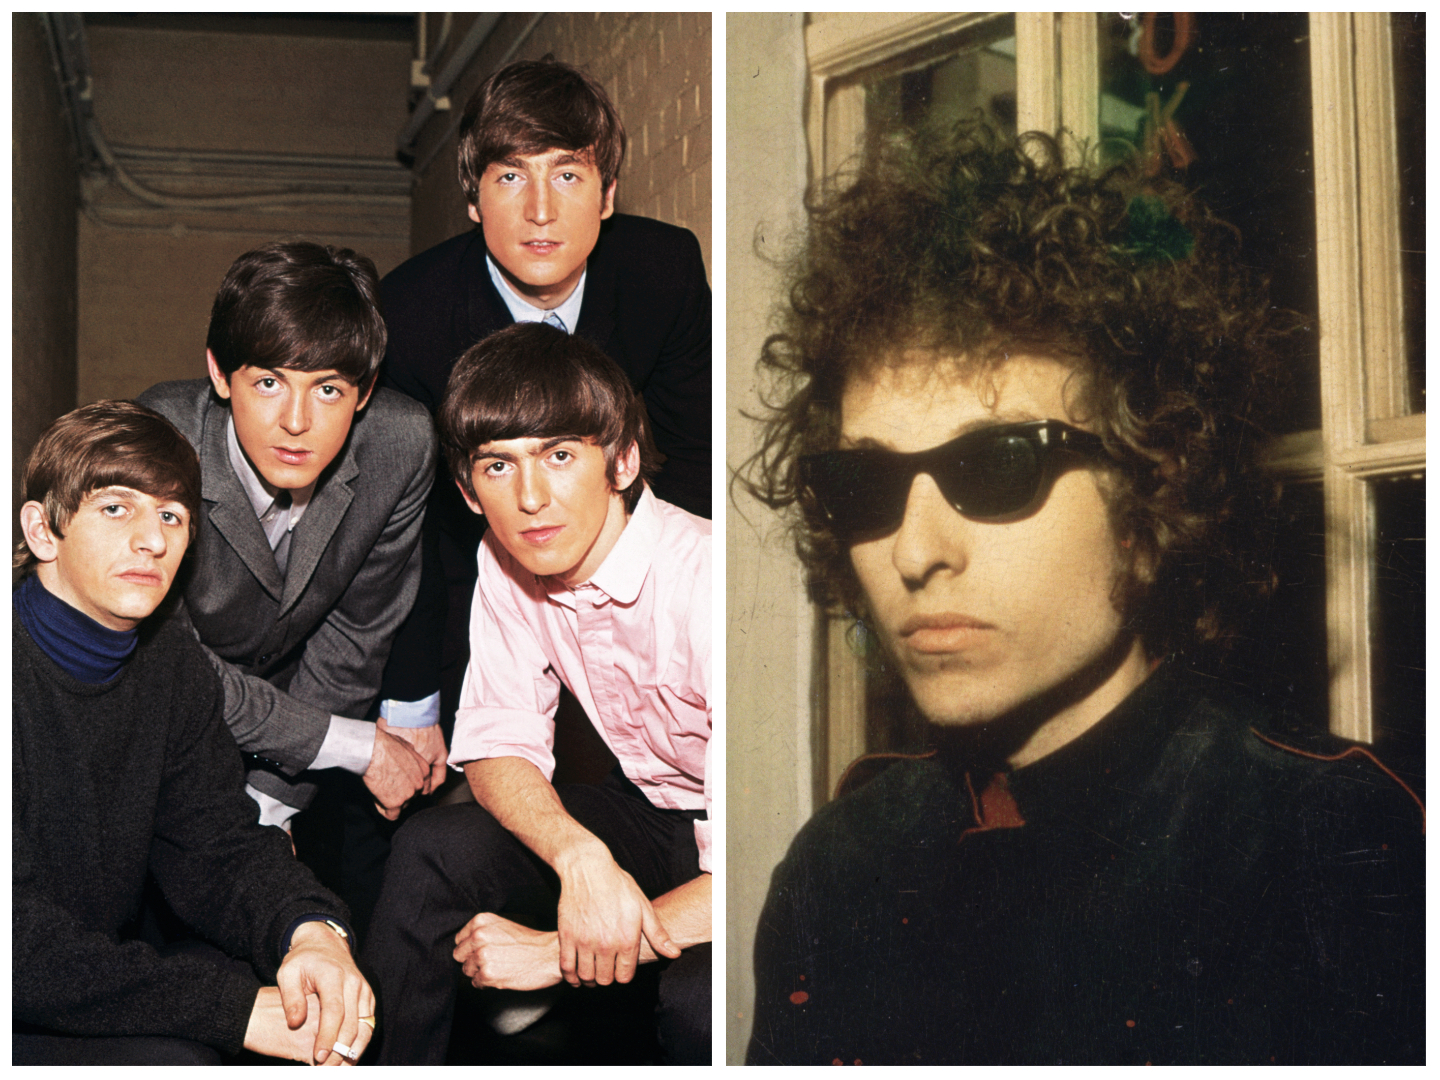 The Beatles pose together, leaning forward toward the camera. Bob Dylan wears sunglasses and stands by a window.